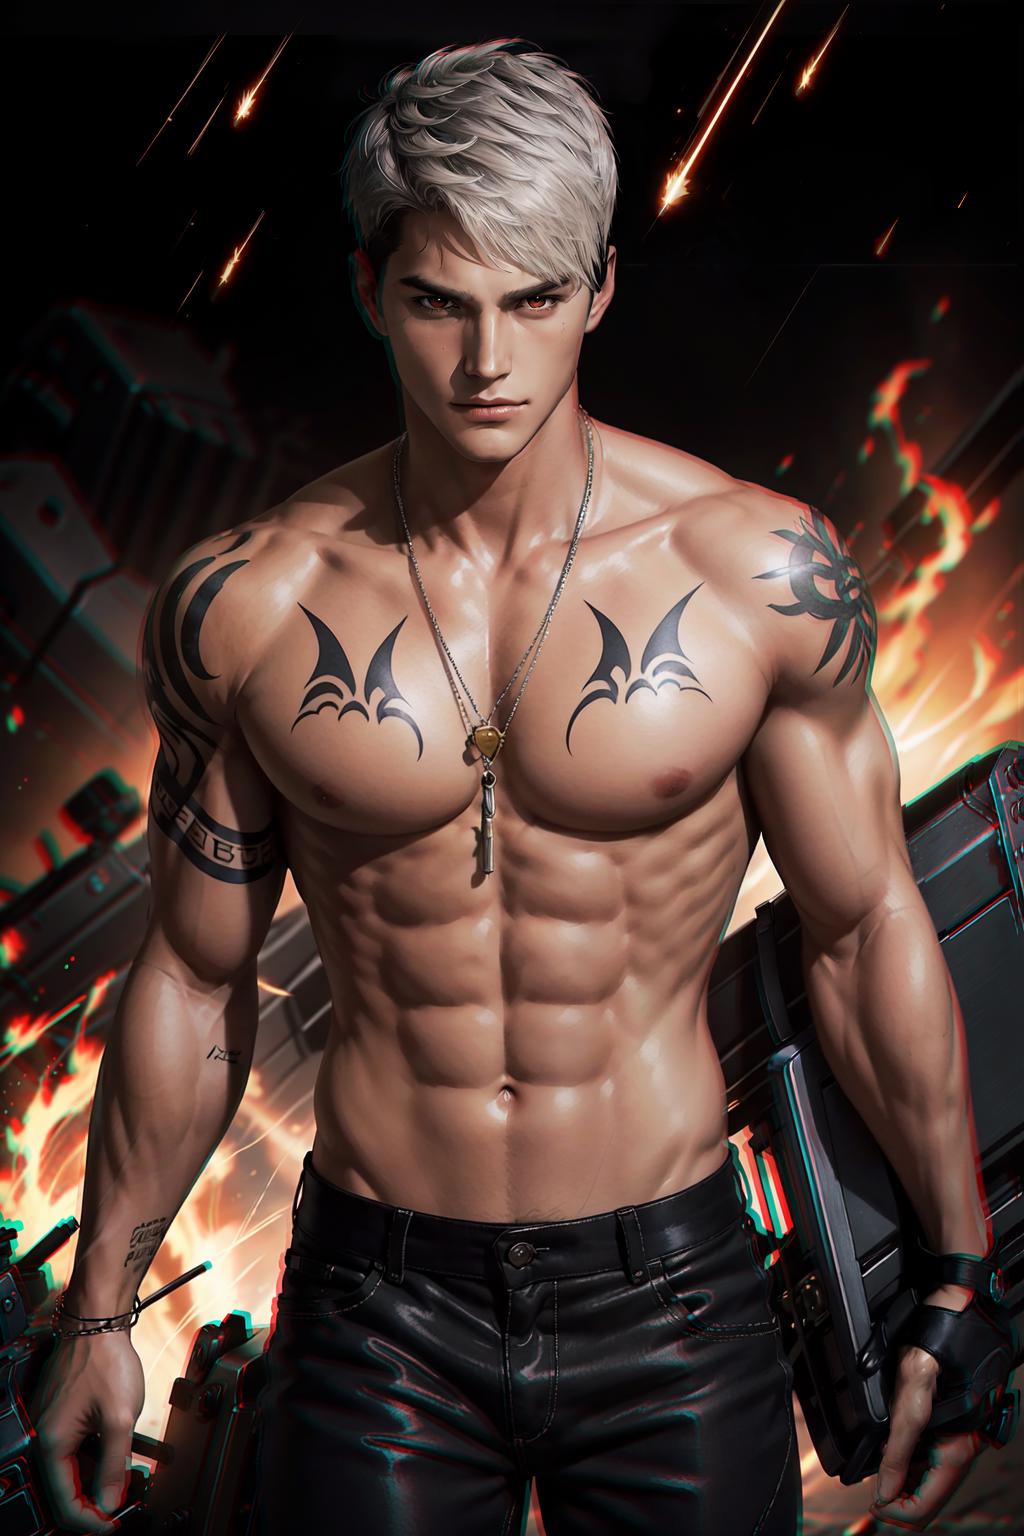 A shirtless man with tattoos and a necklace posing in front of a fire.